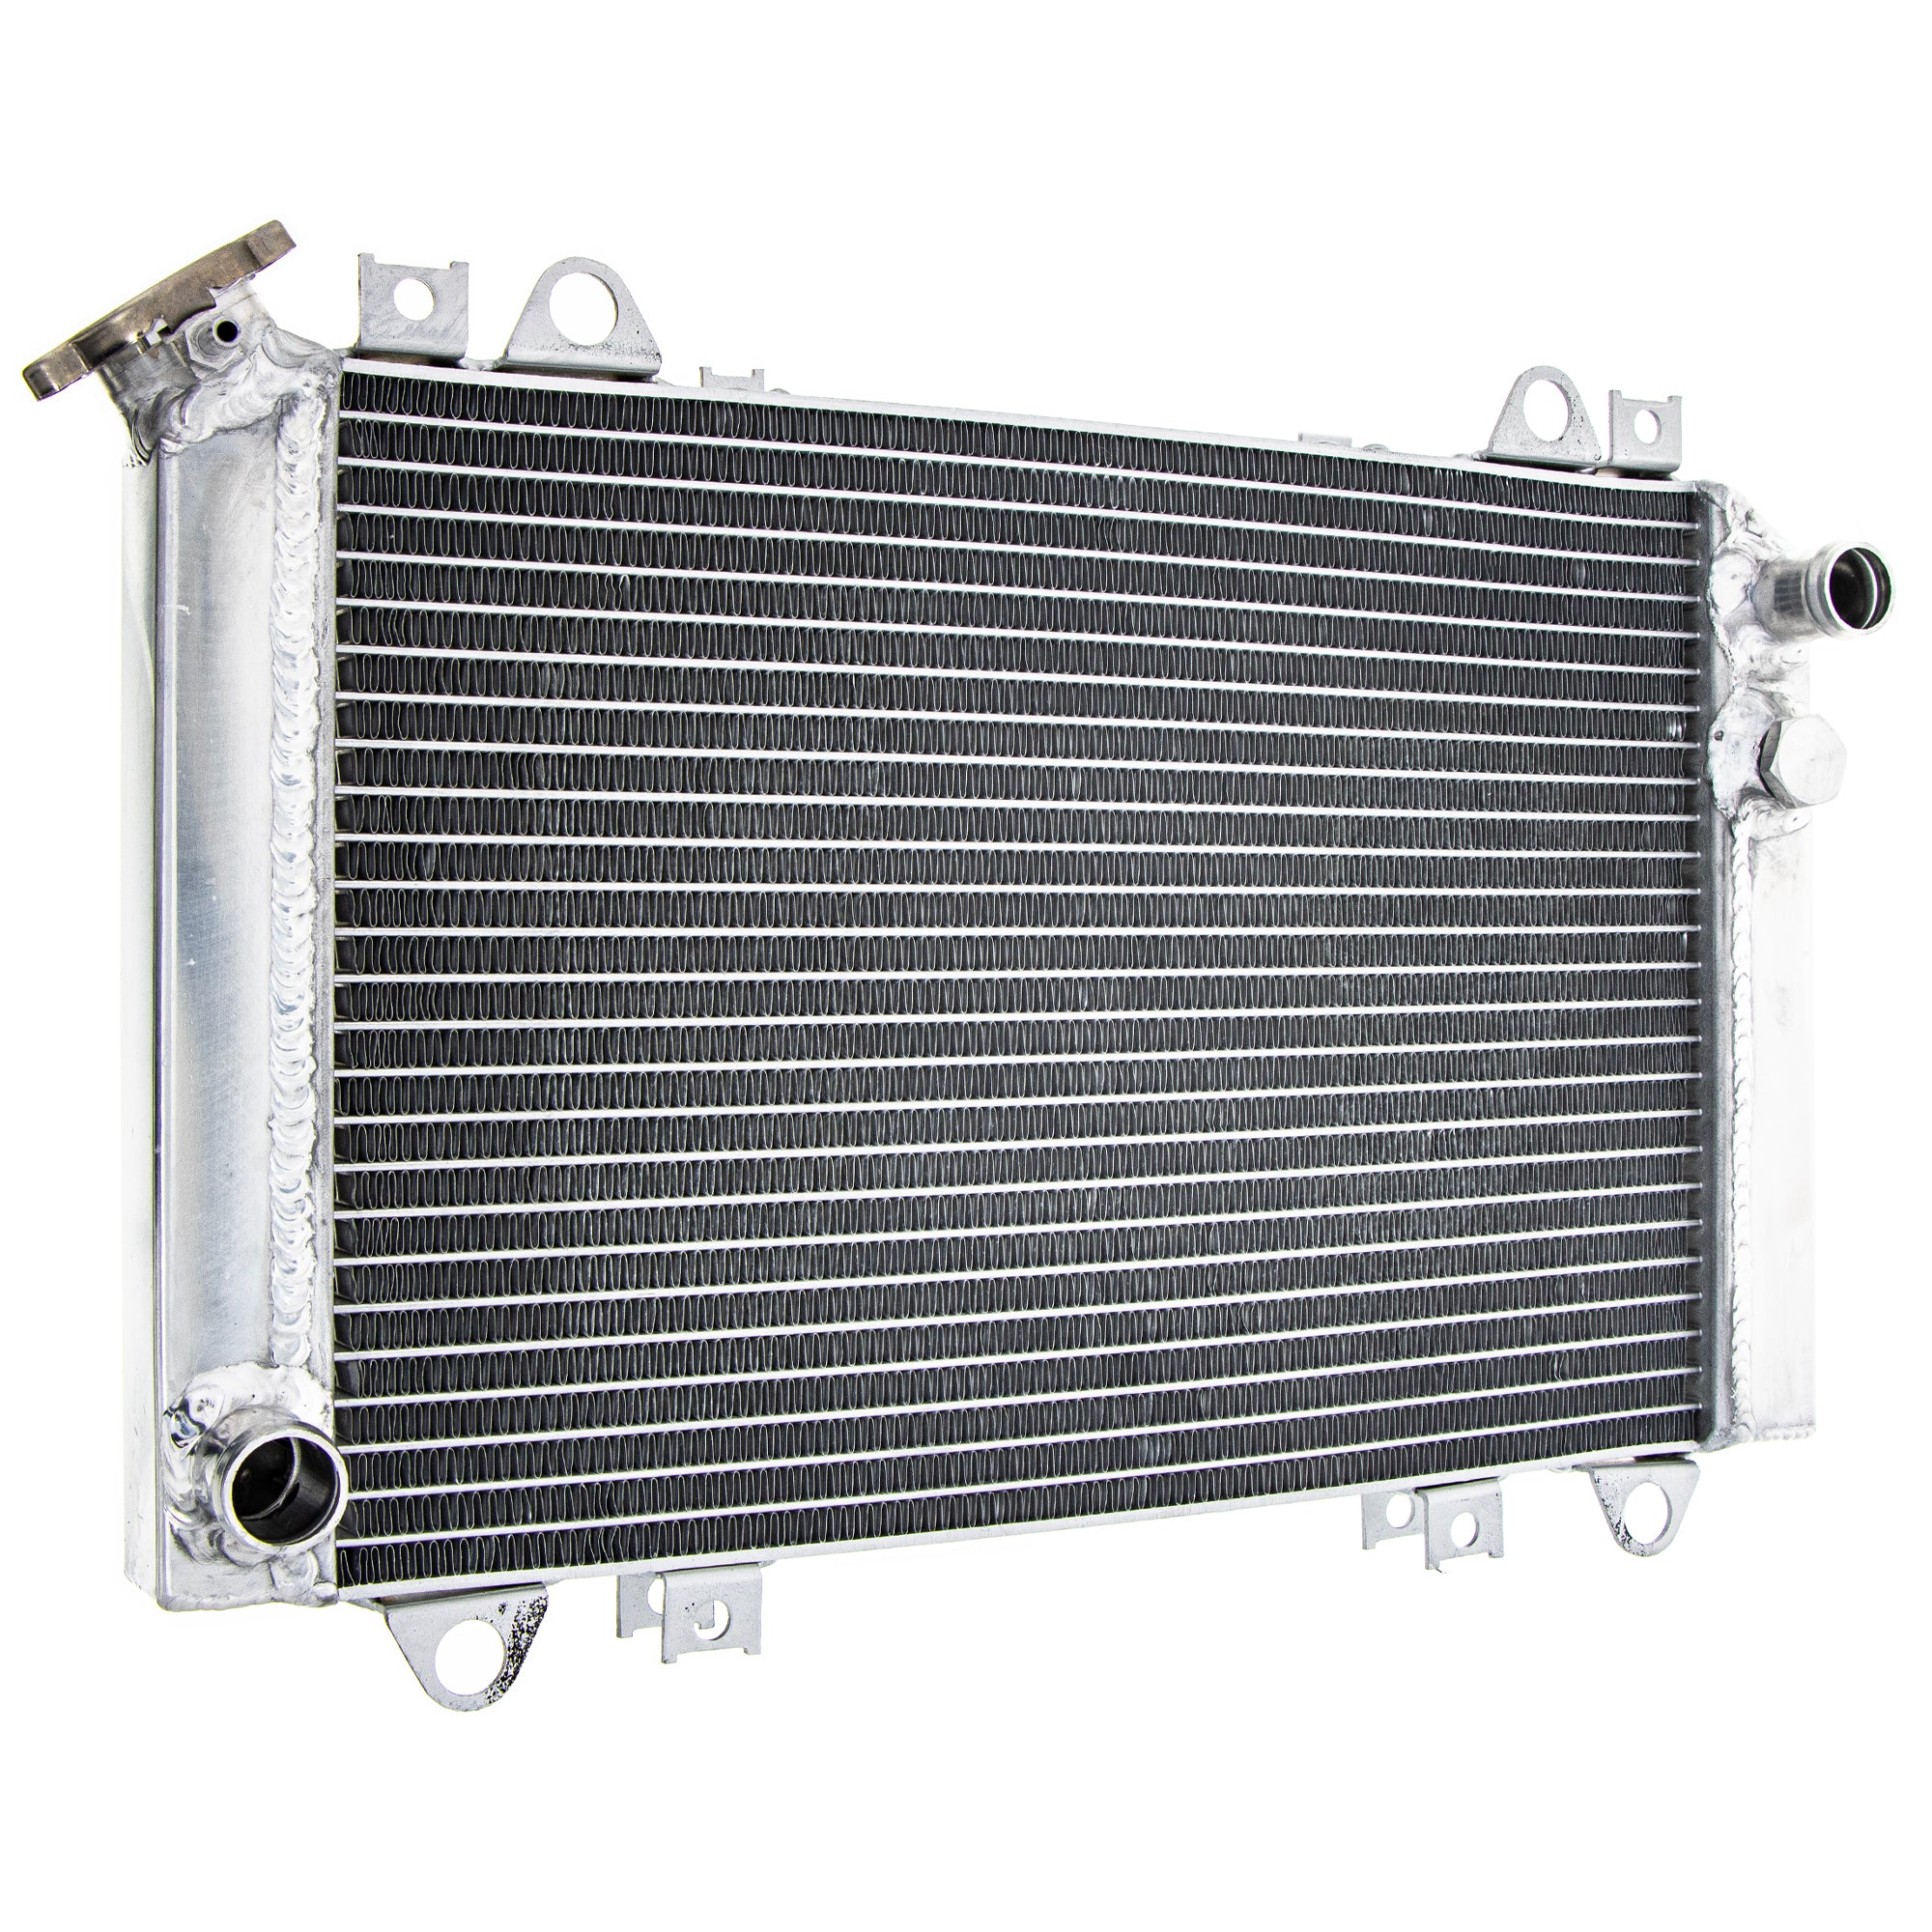 High Capacity Radiator for zOTHER Mule NICHE 519-CRD2253A